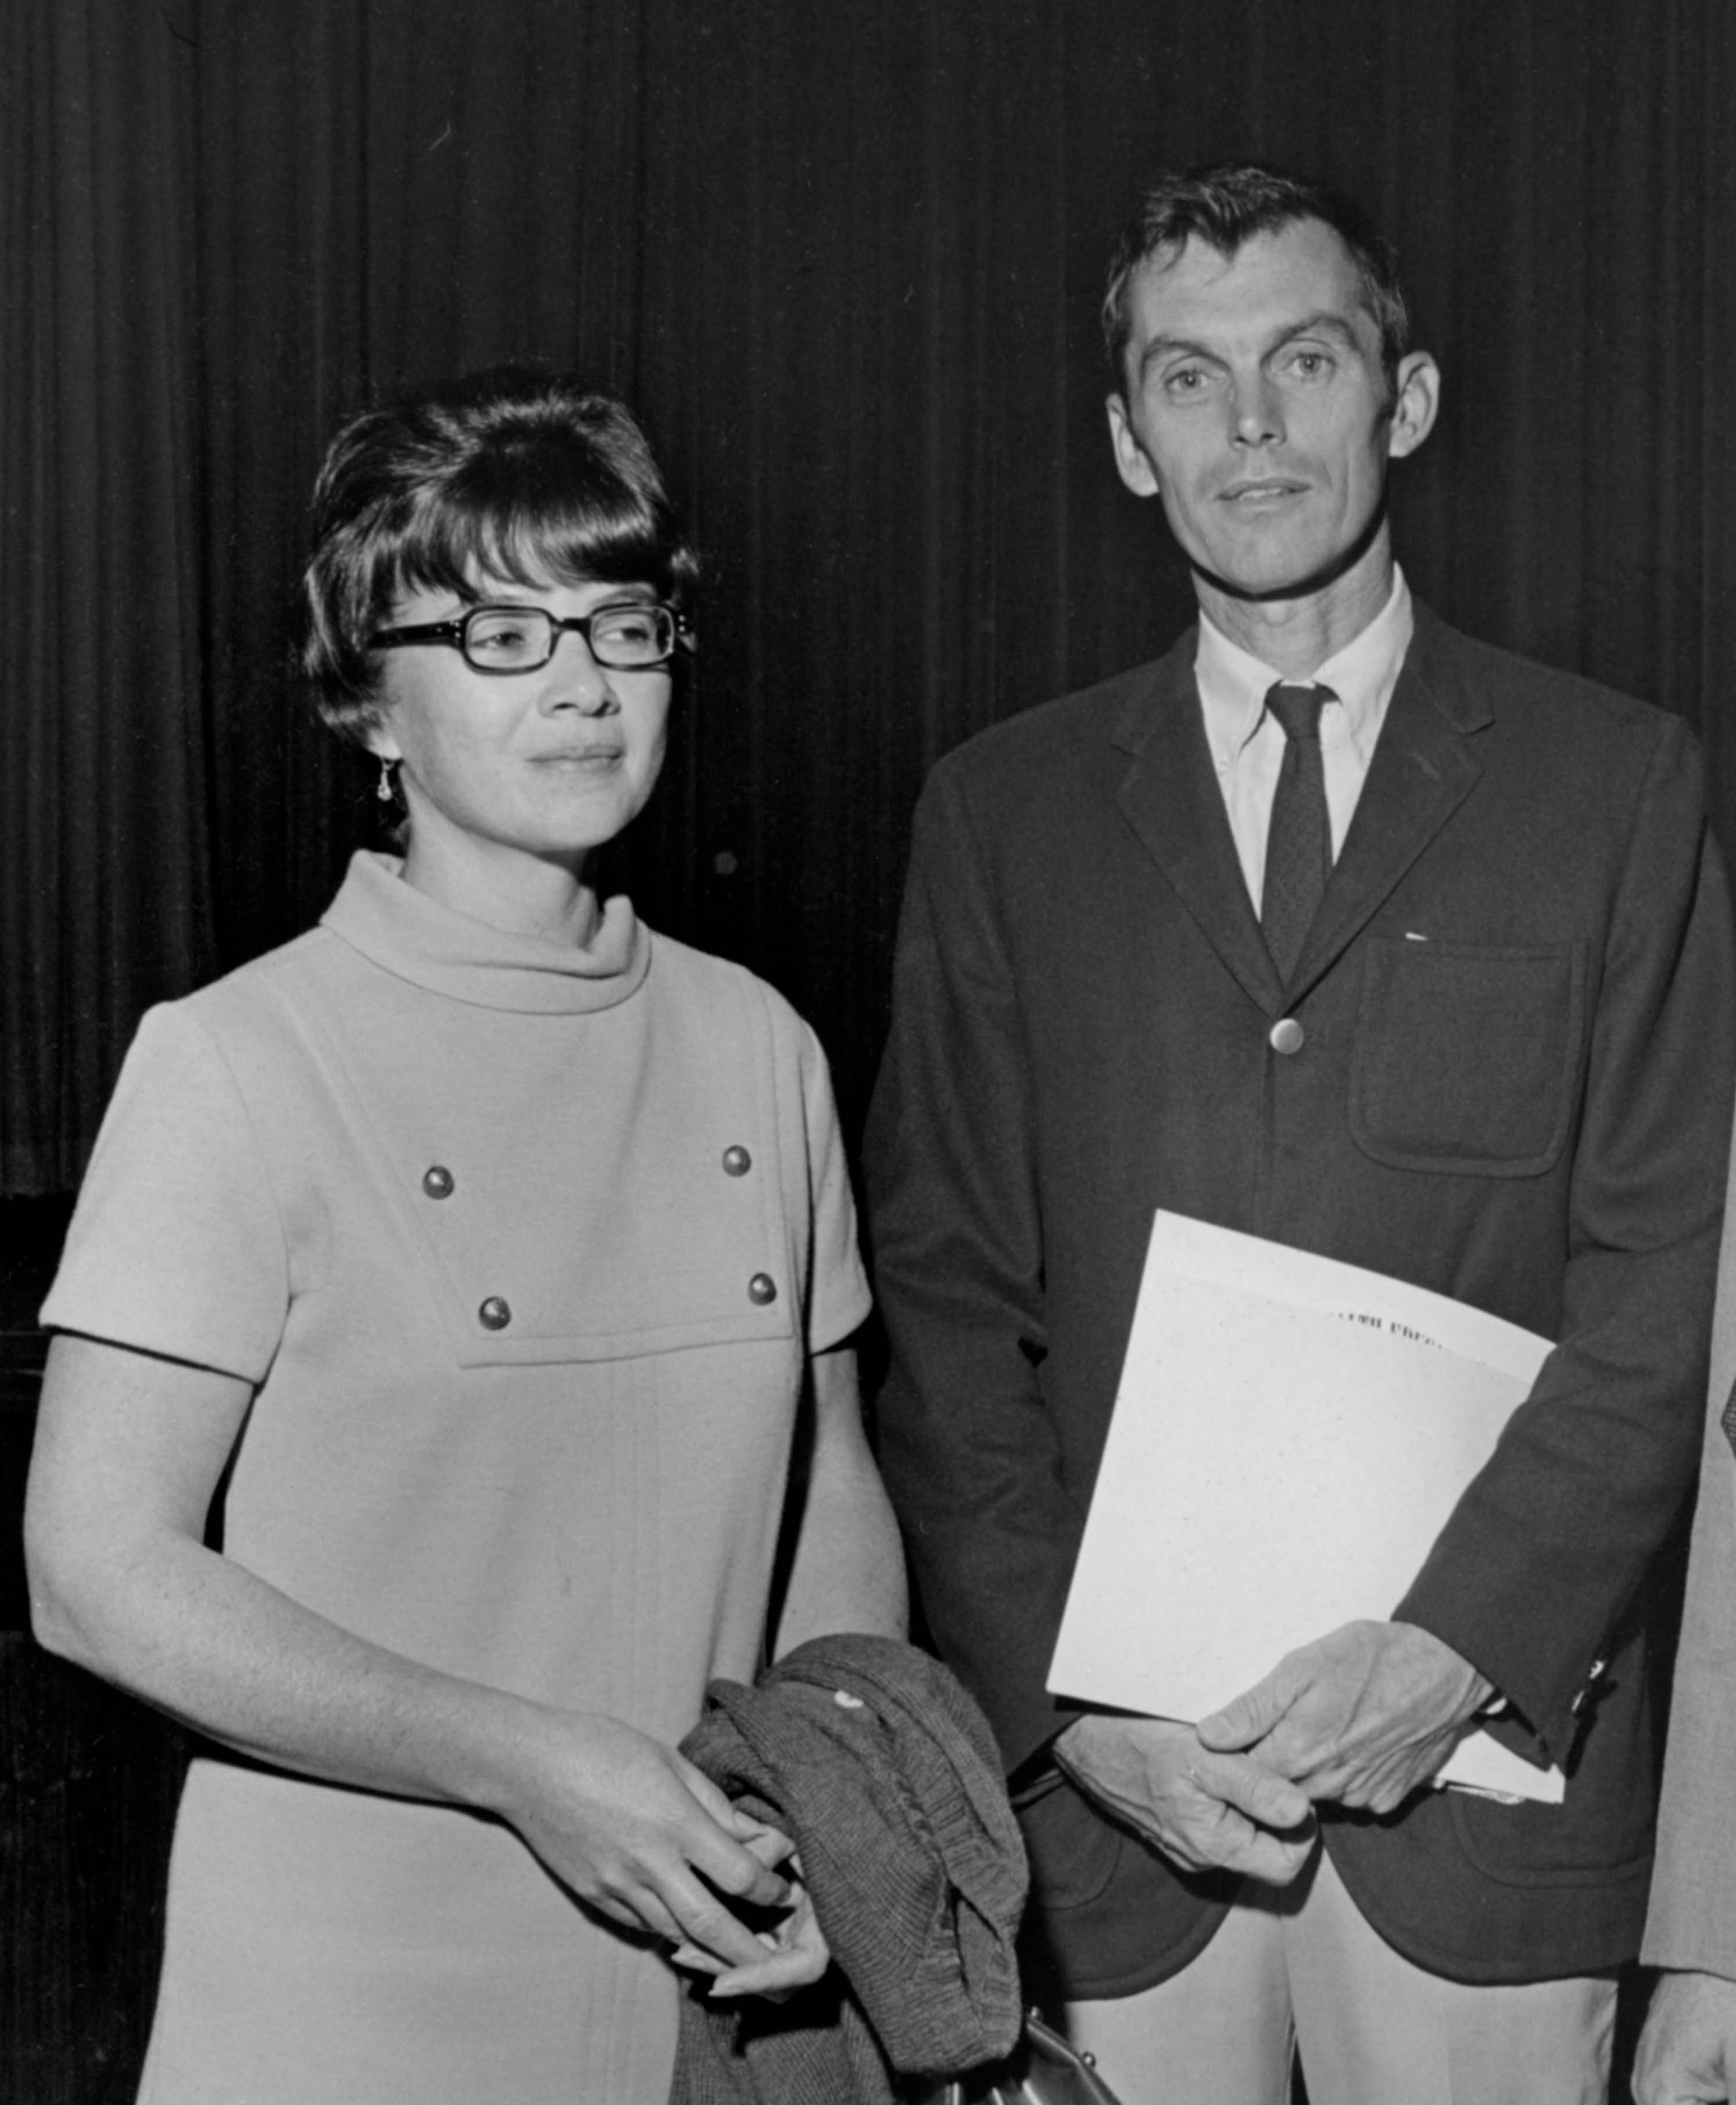 Dr. Potter holding award, standing next to his wife